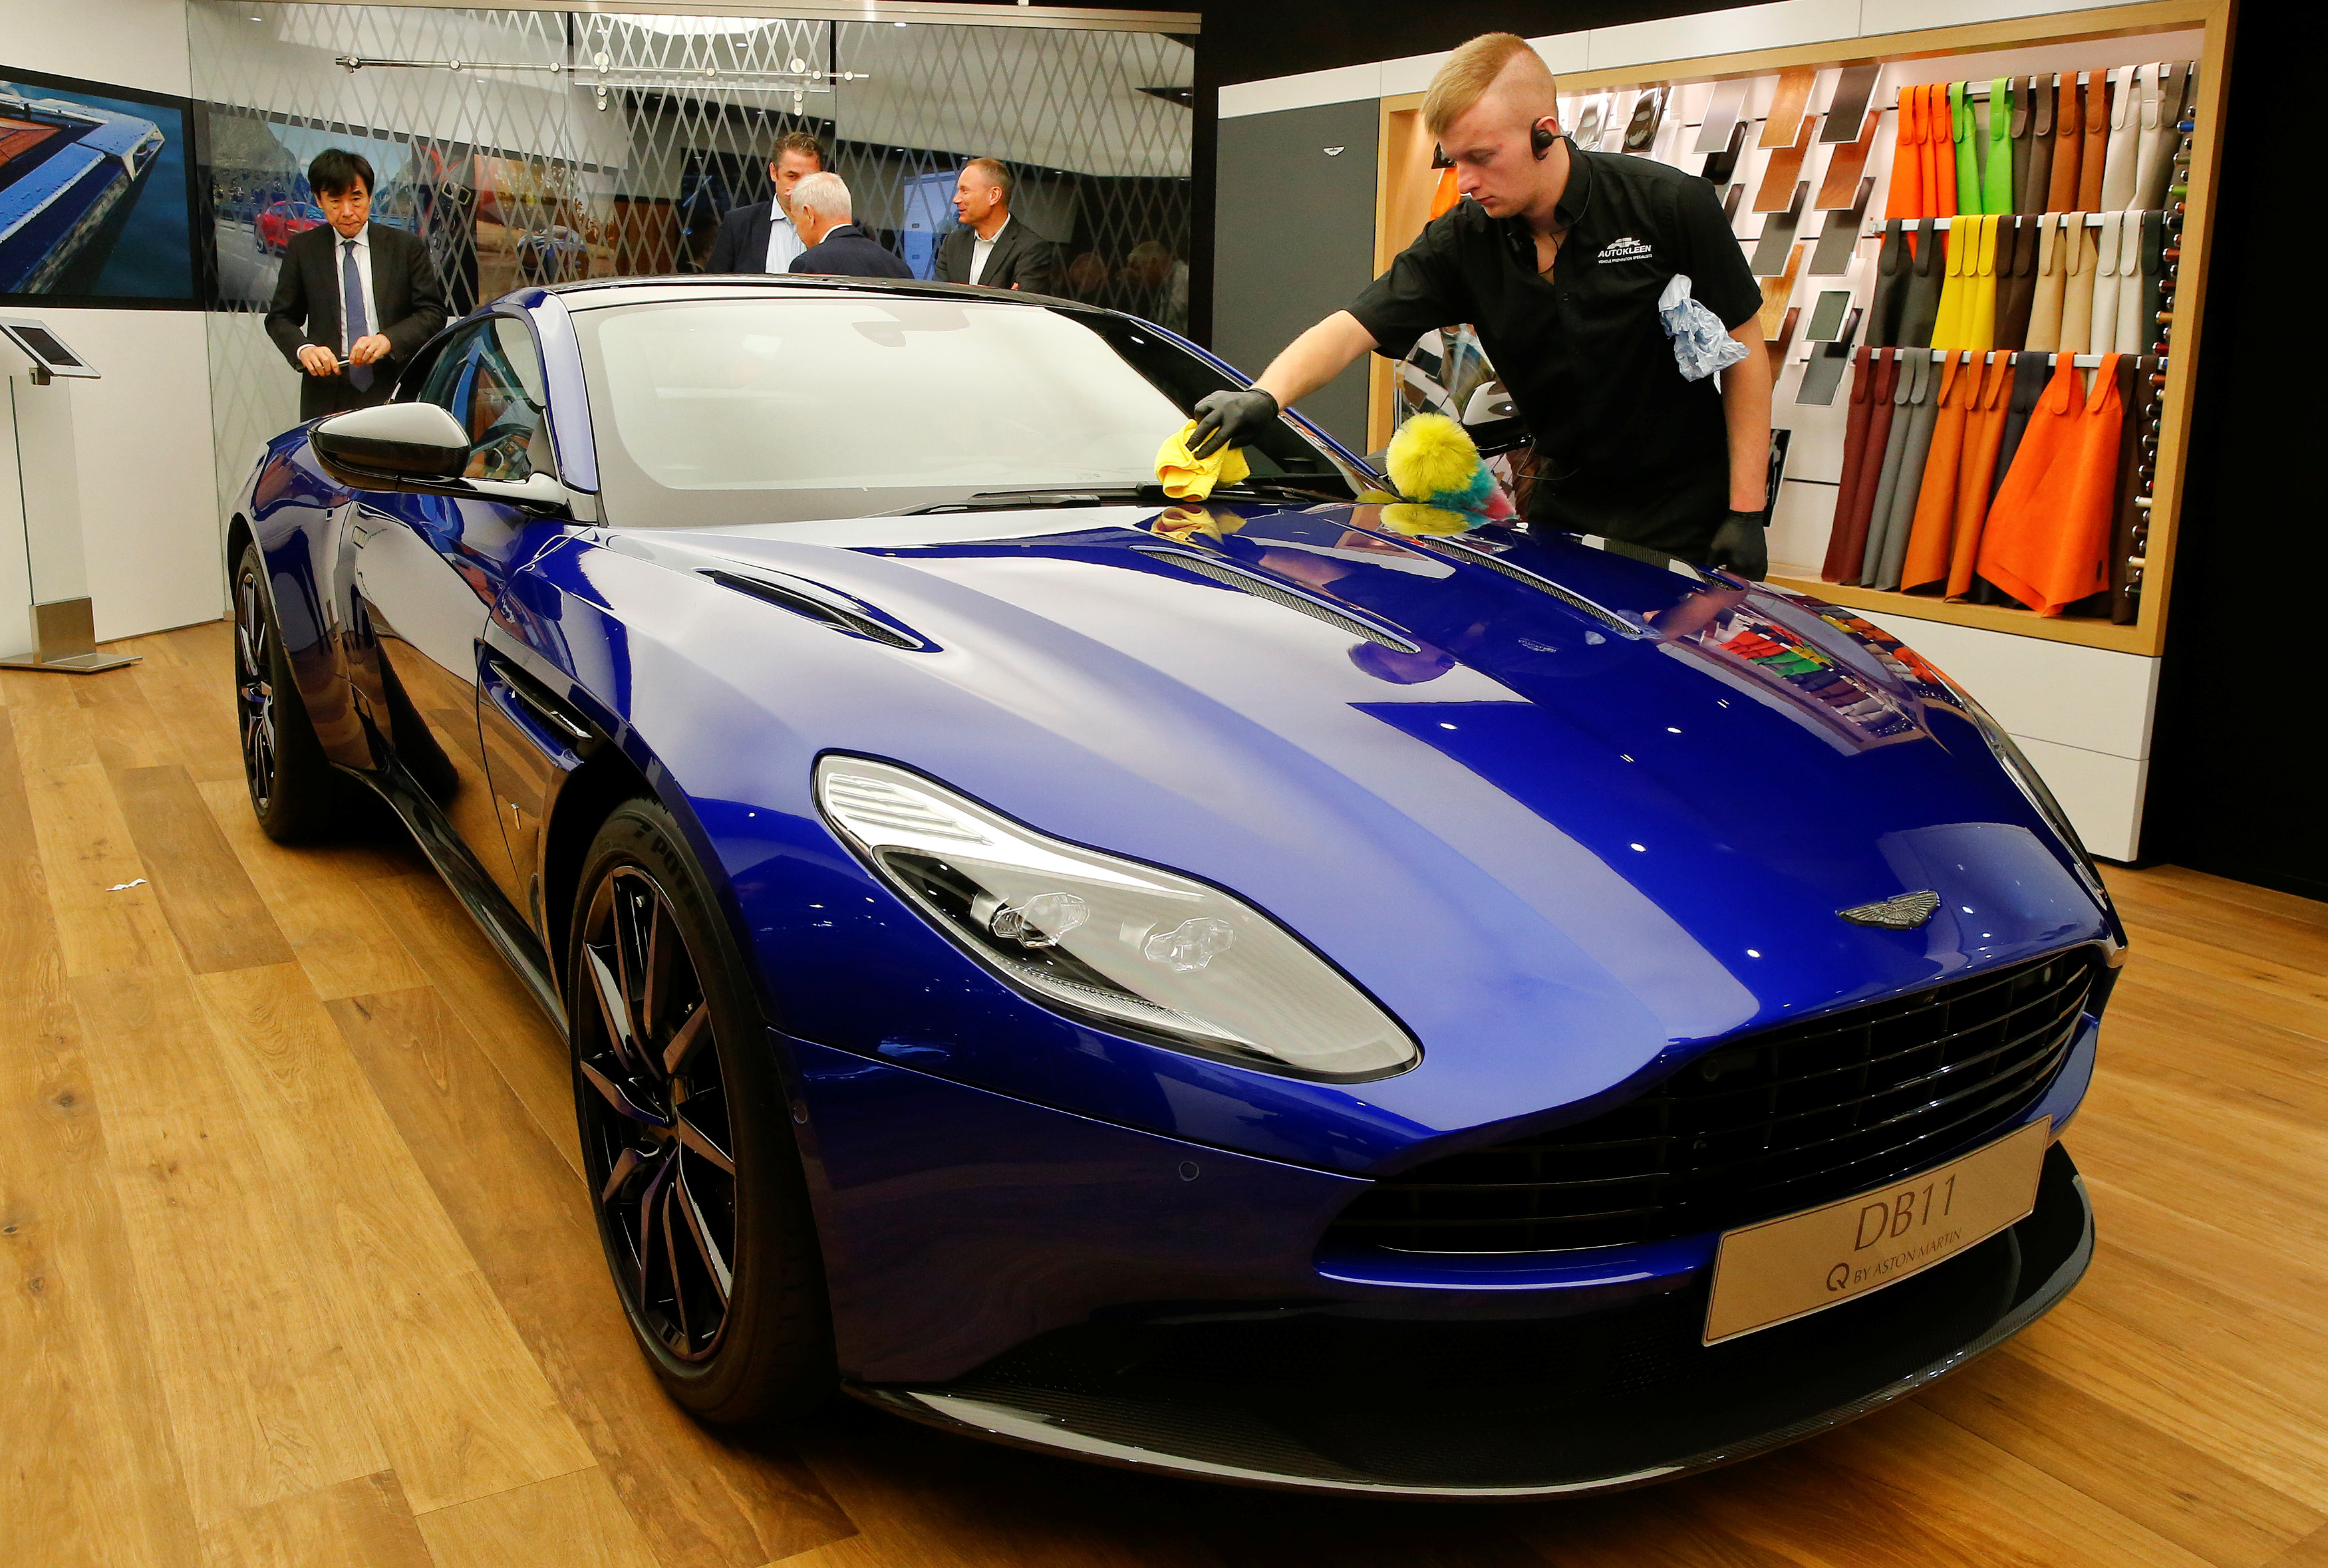 An Aston Martin DB11 car is seen during the 87th International Motor Show at Palexpo in Geneva